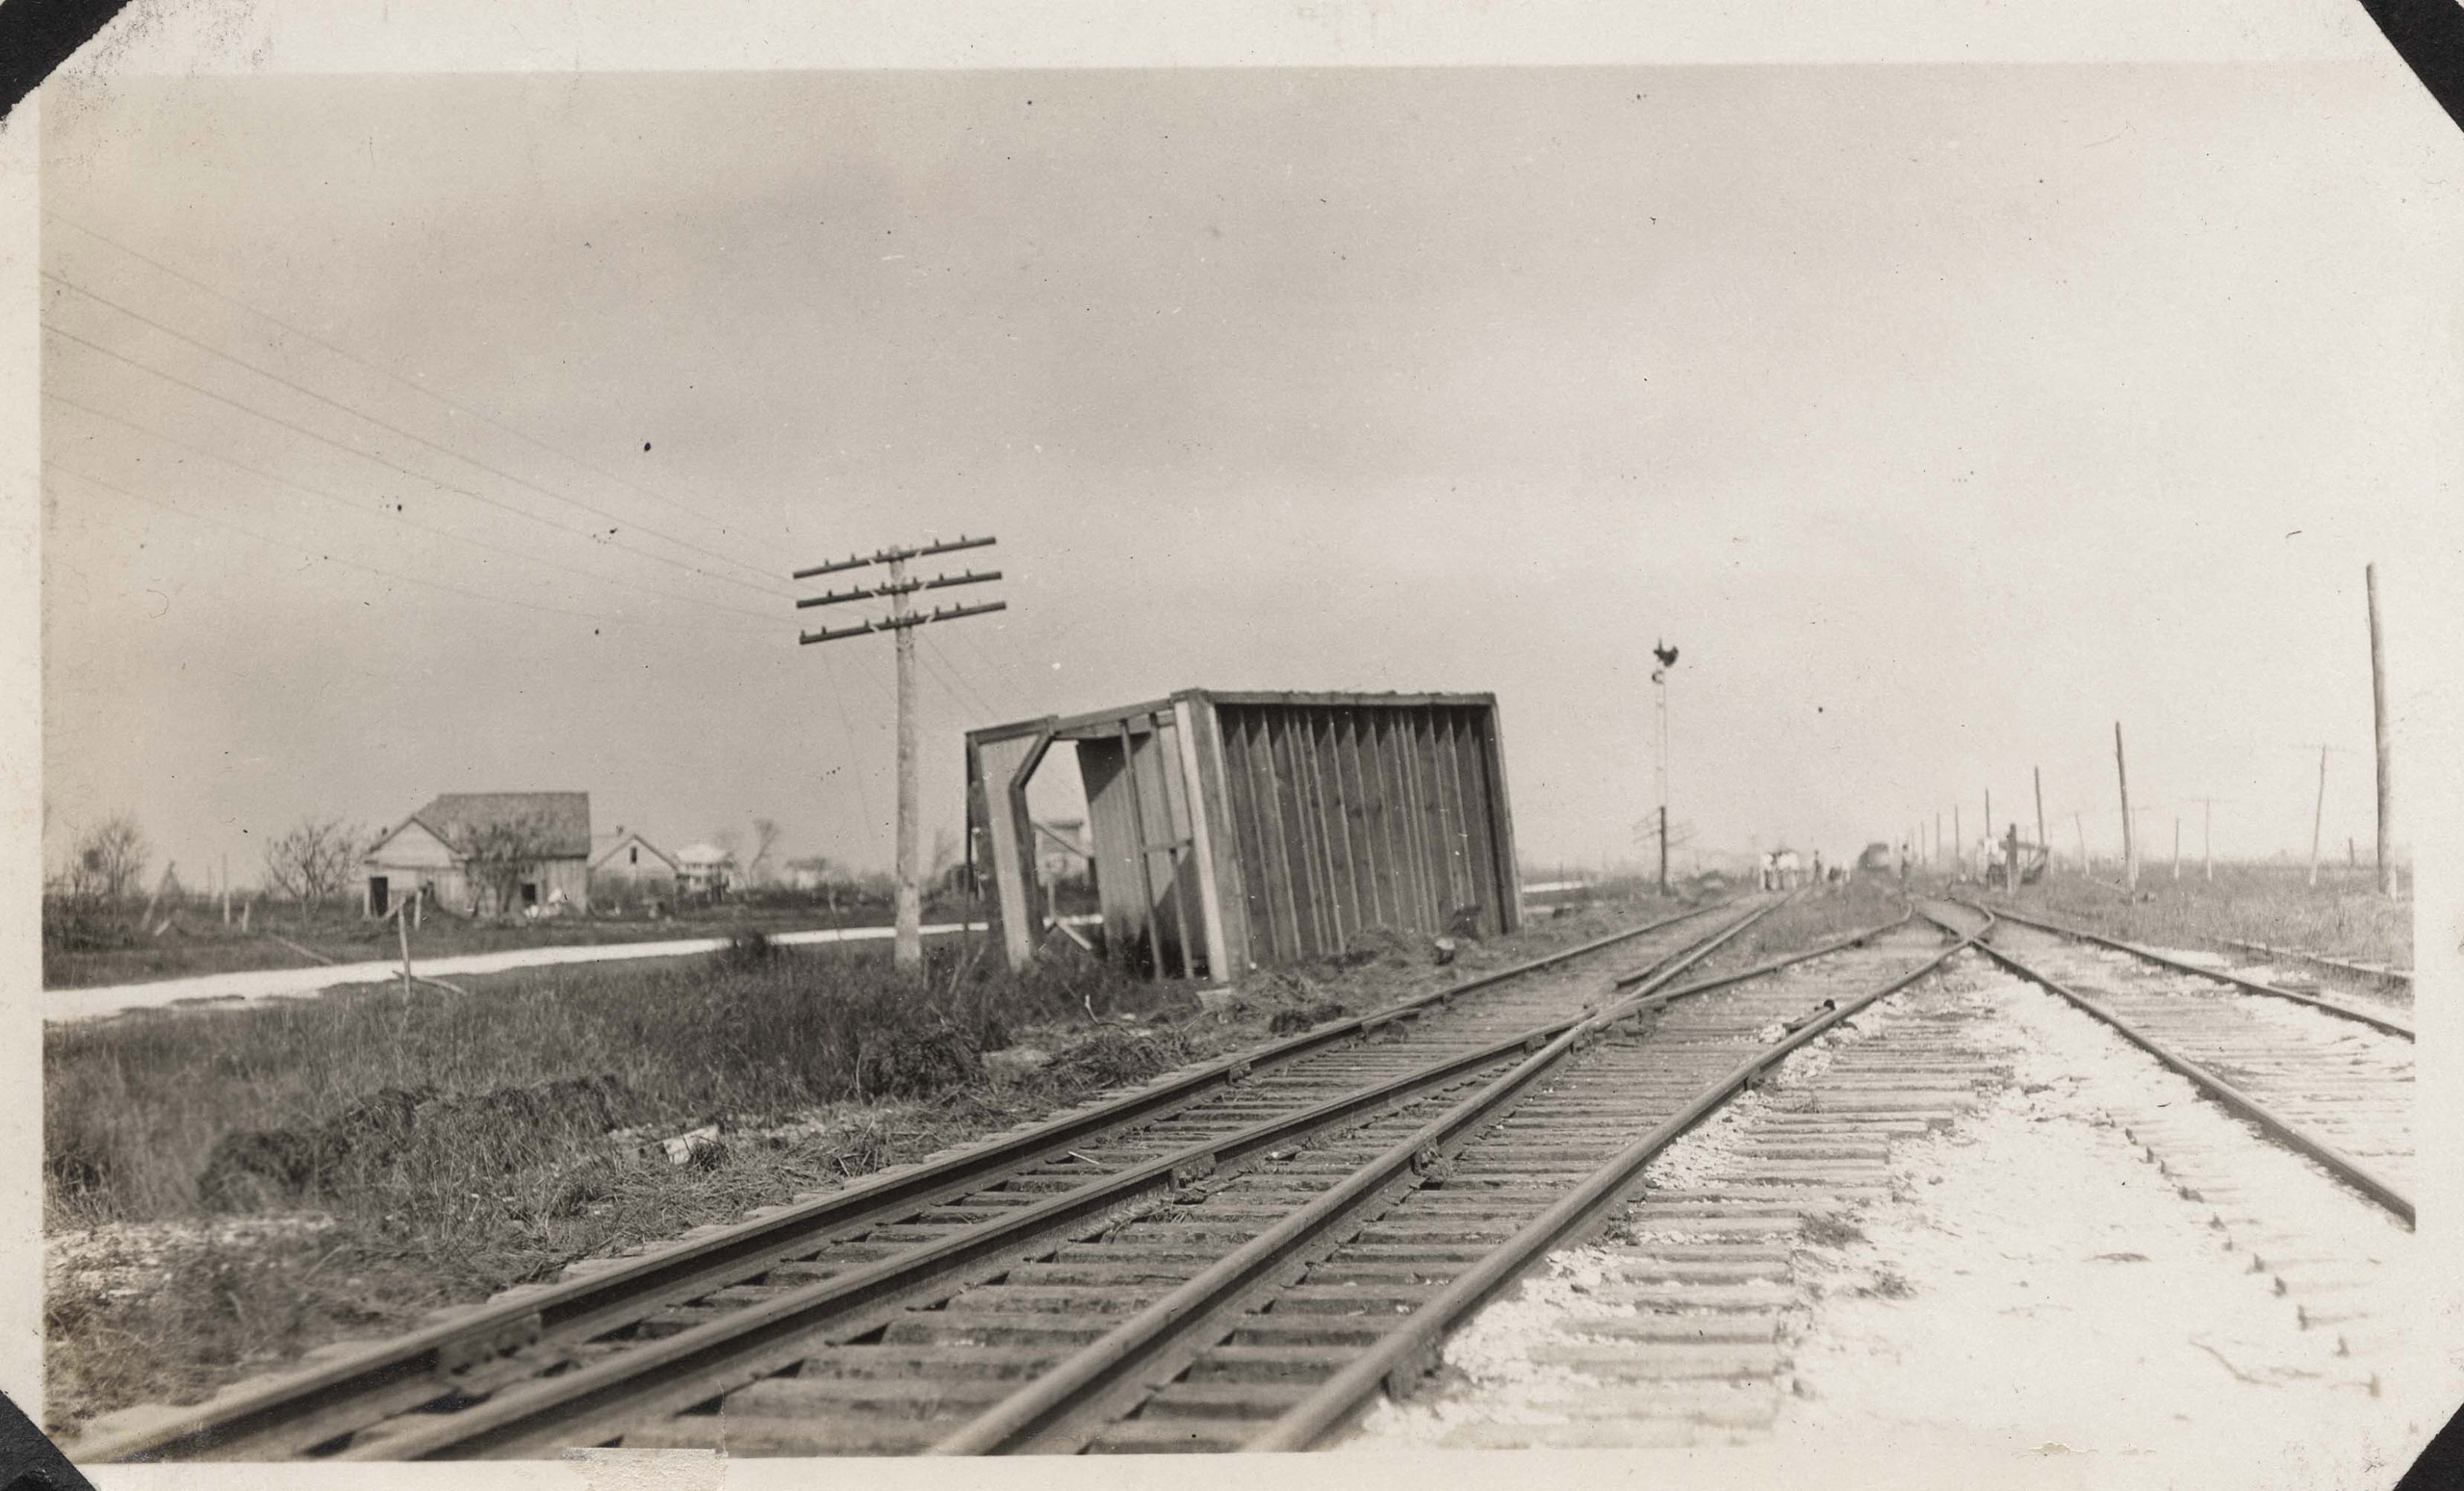 Overturned Southern Pacific passenger station at Tx City Junction (drifted ~1200 ft.).